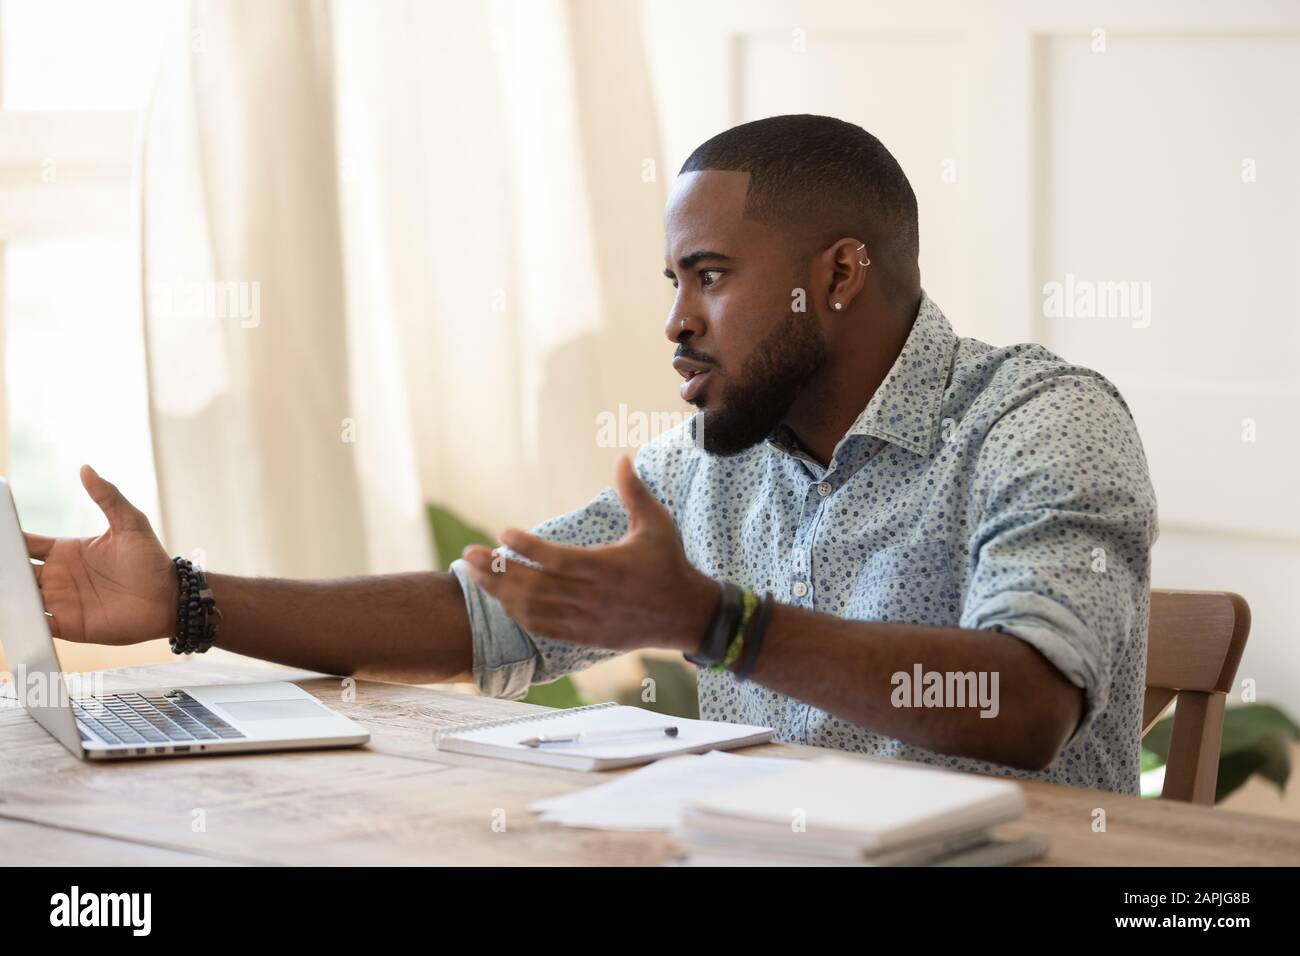 African guy looks at pc screen talking feels outraged Stock Photo